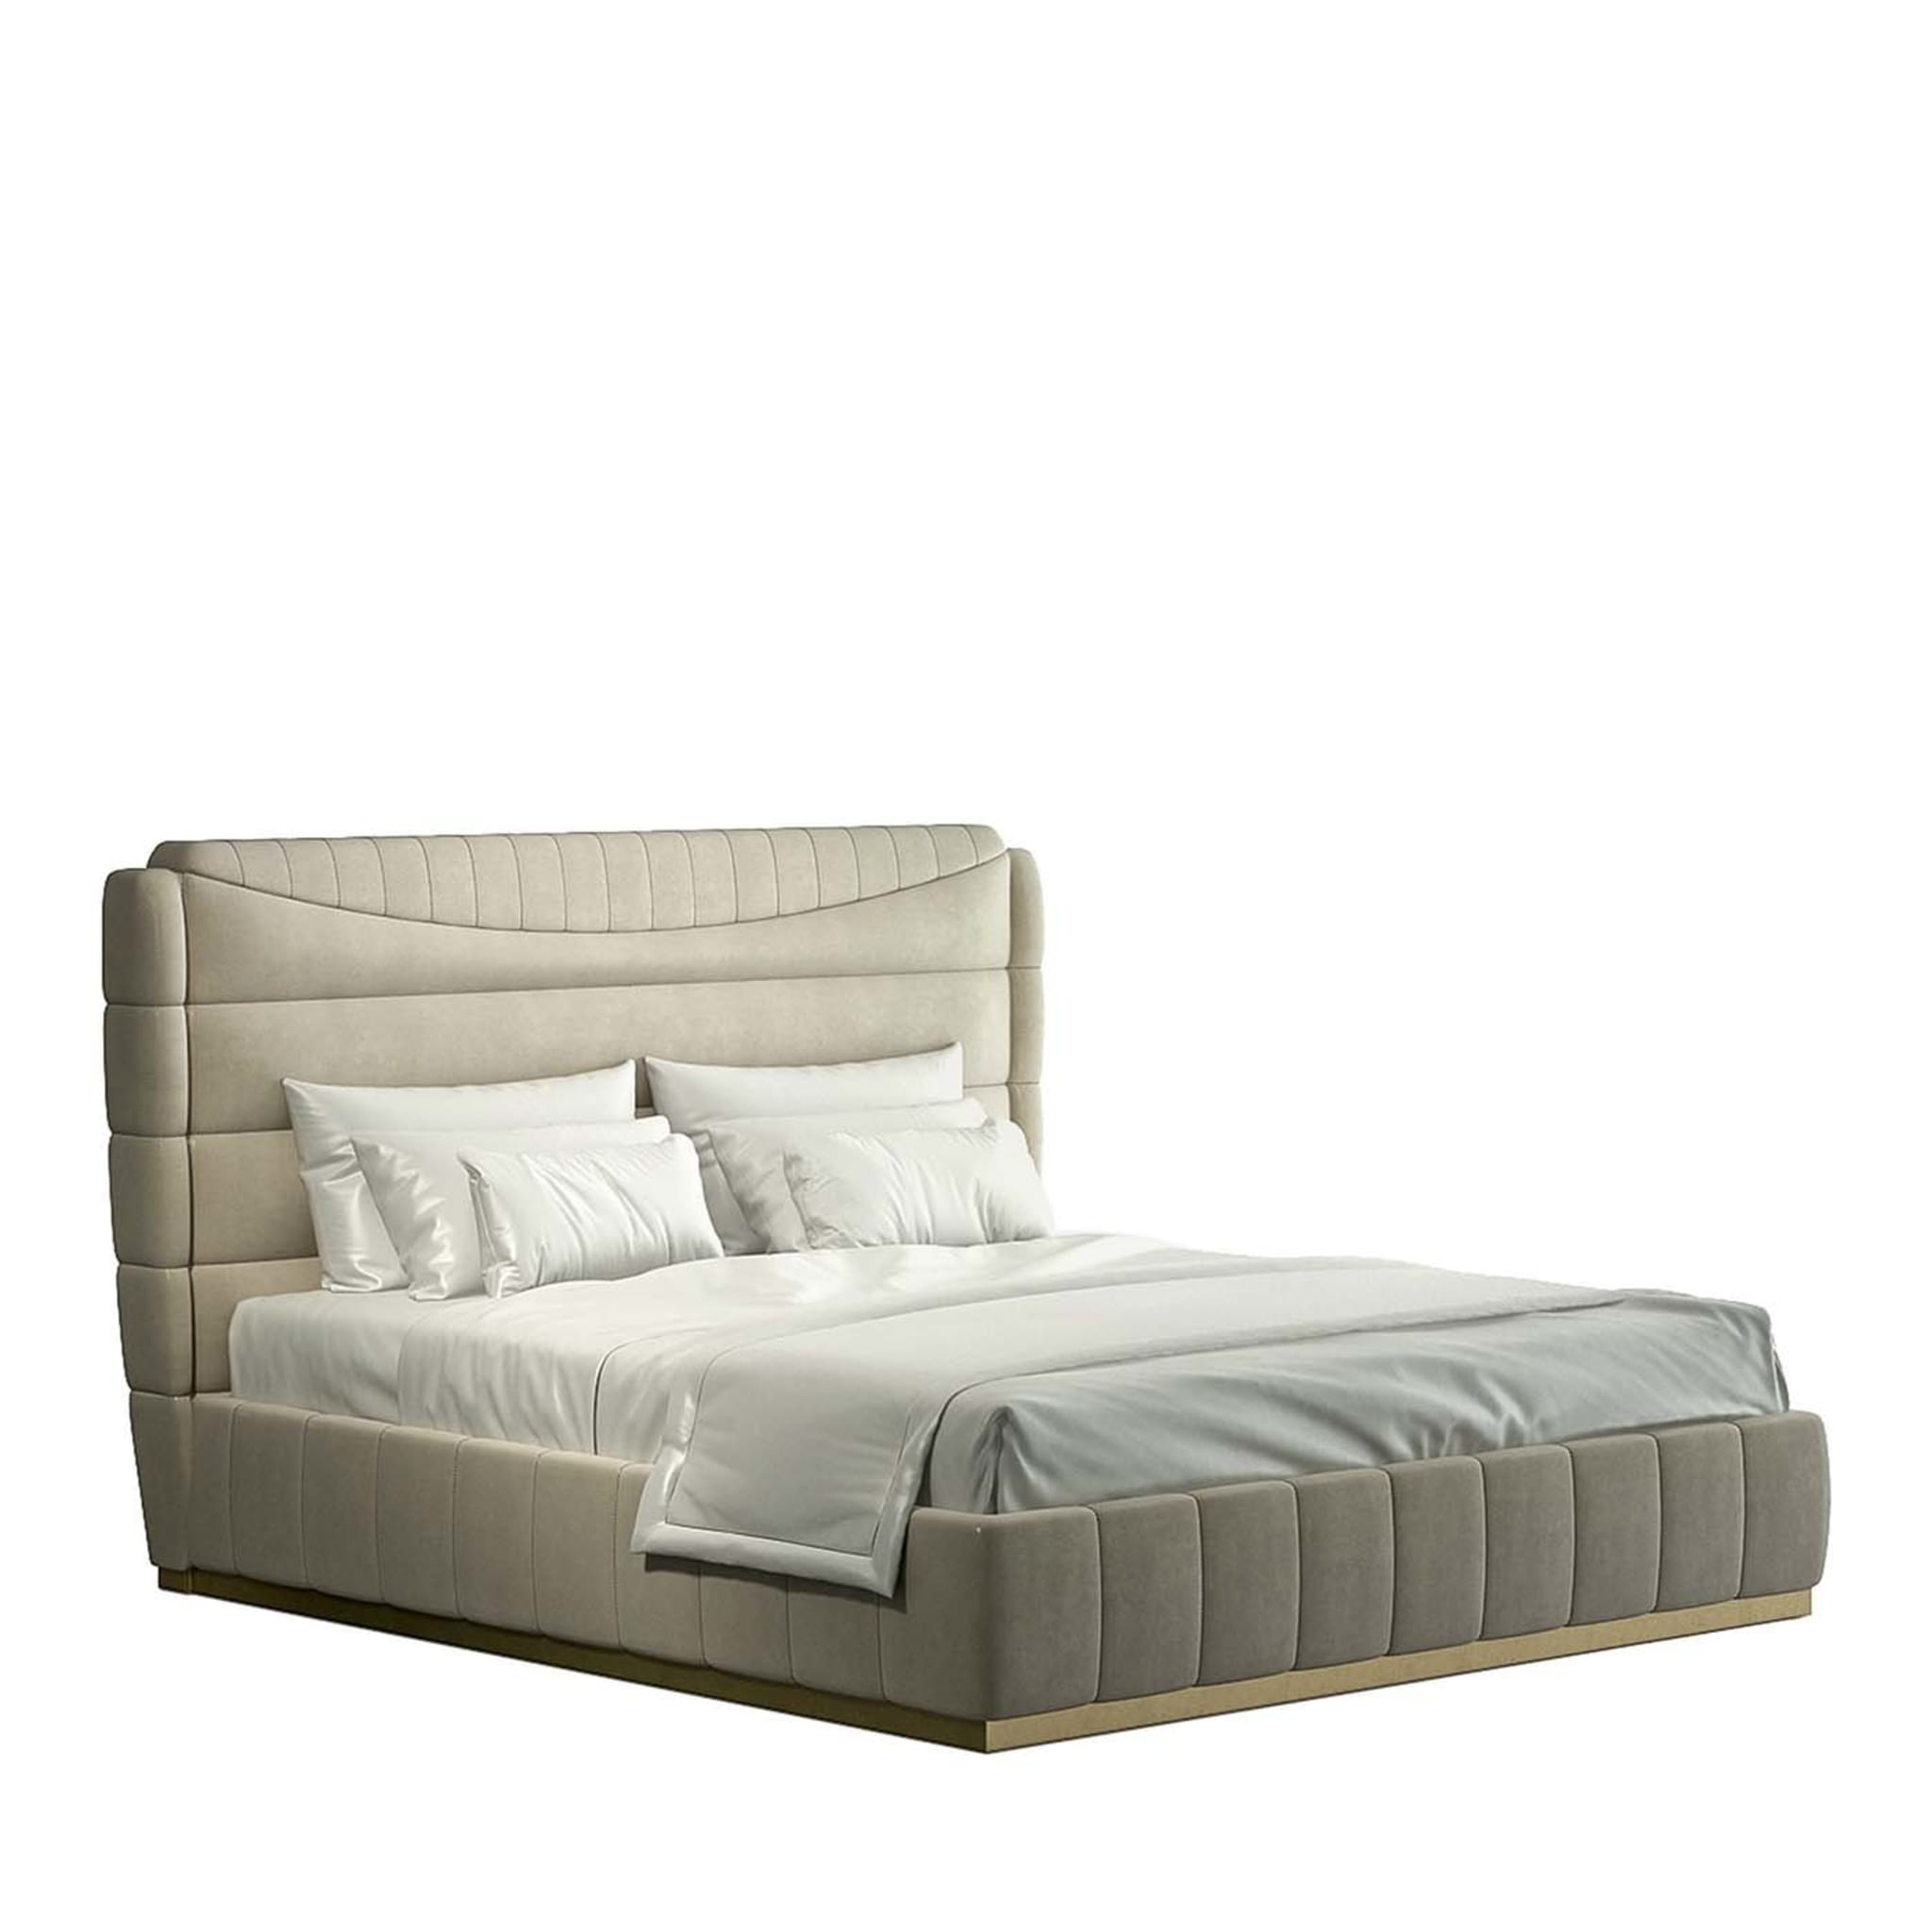 Montecarlo Fitted Bed - Main view